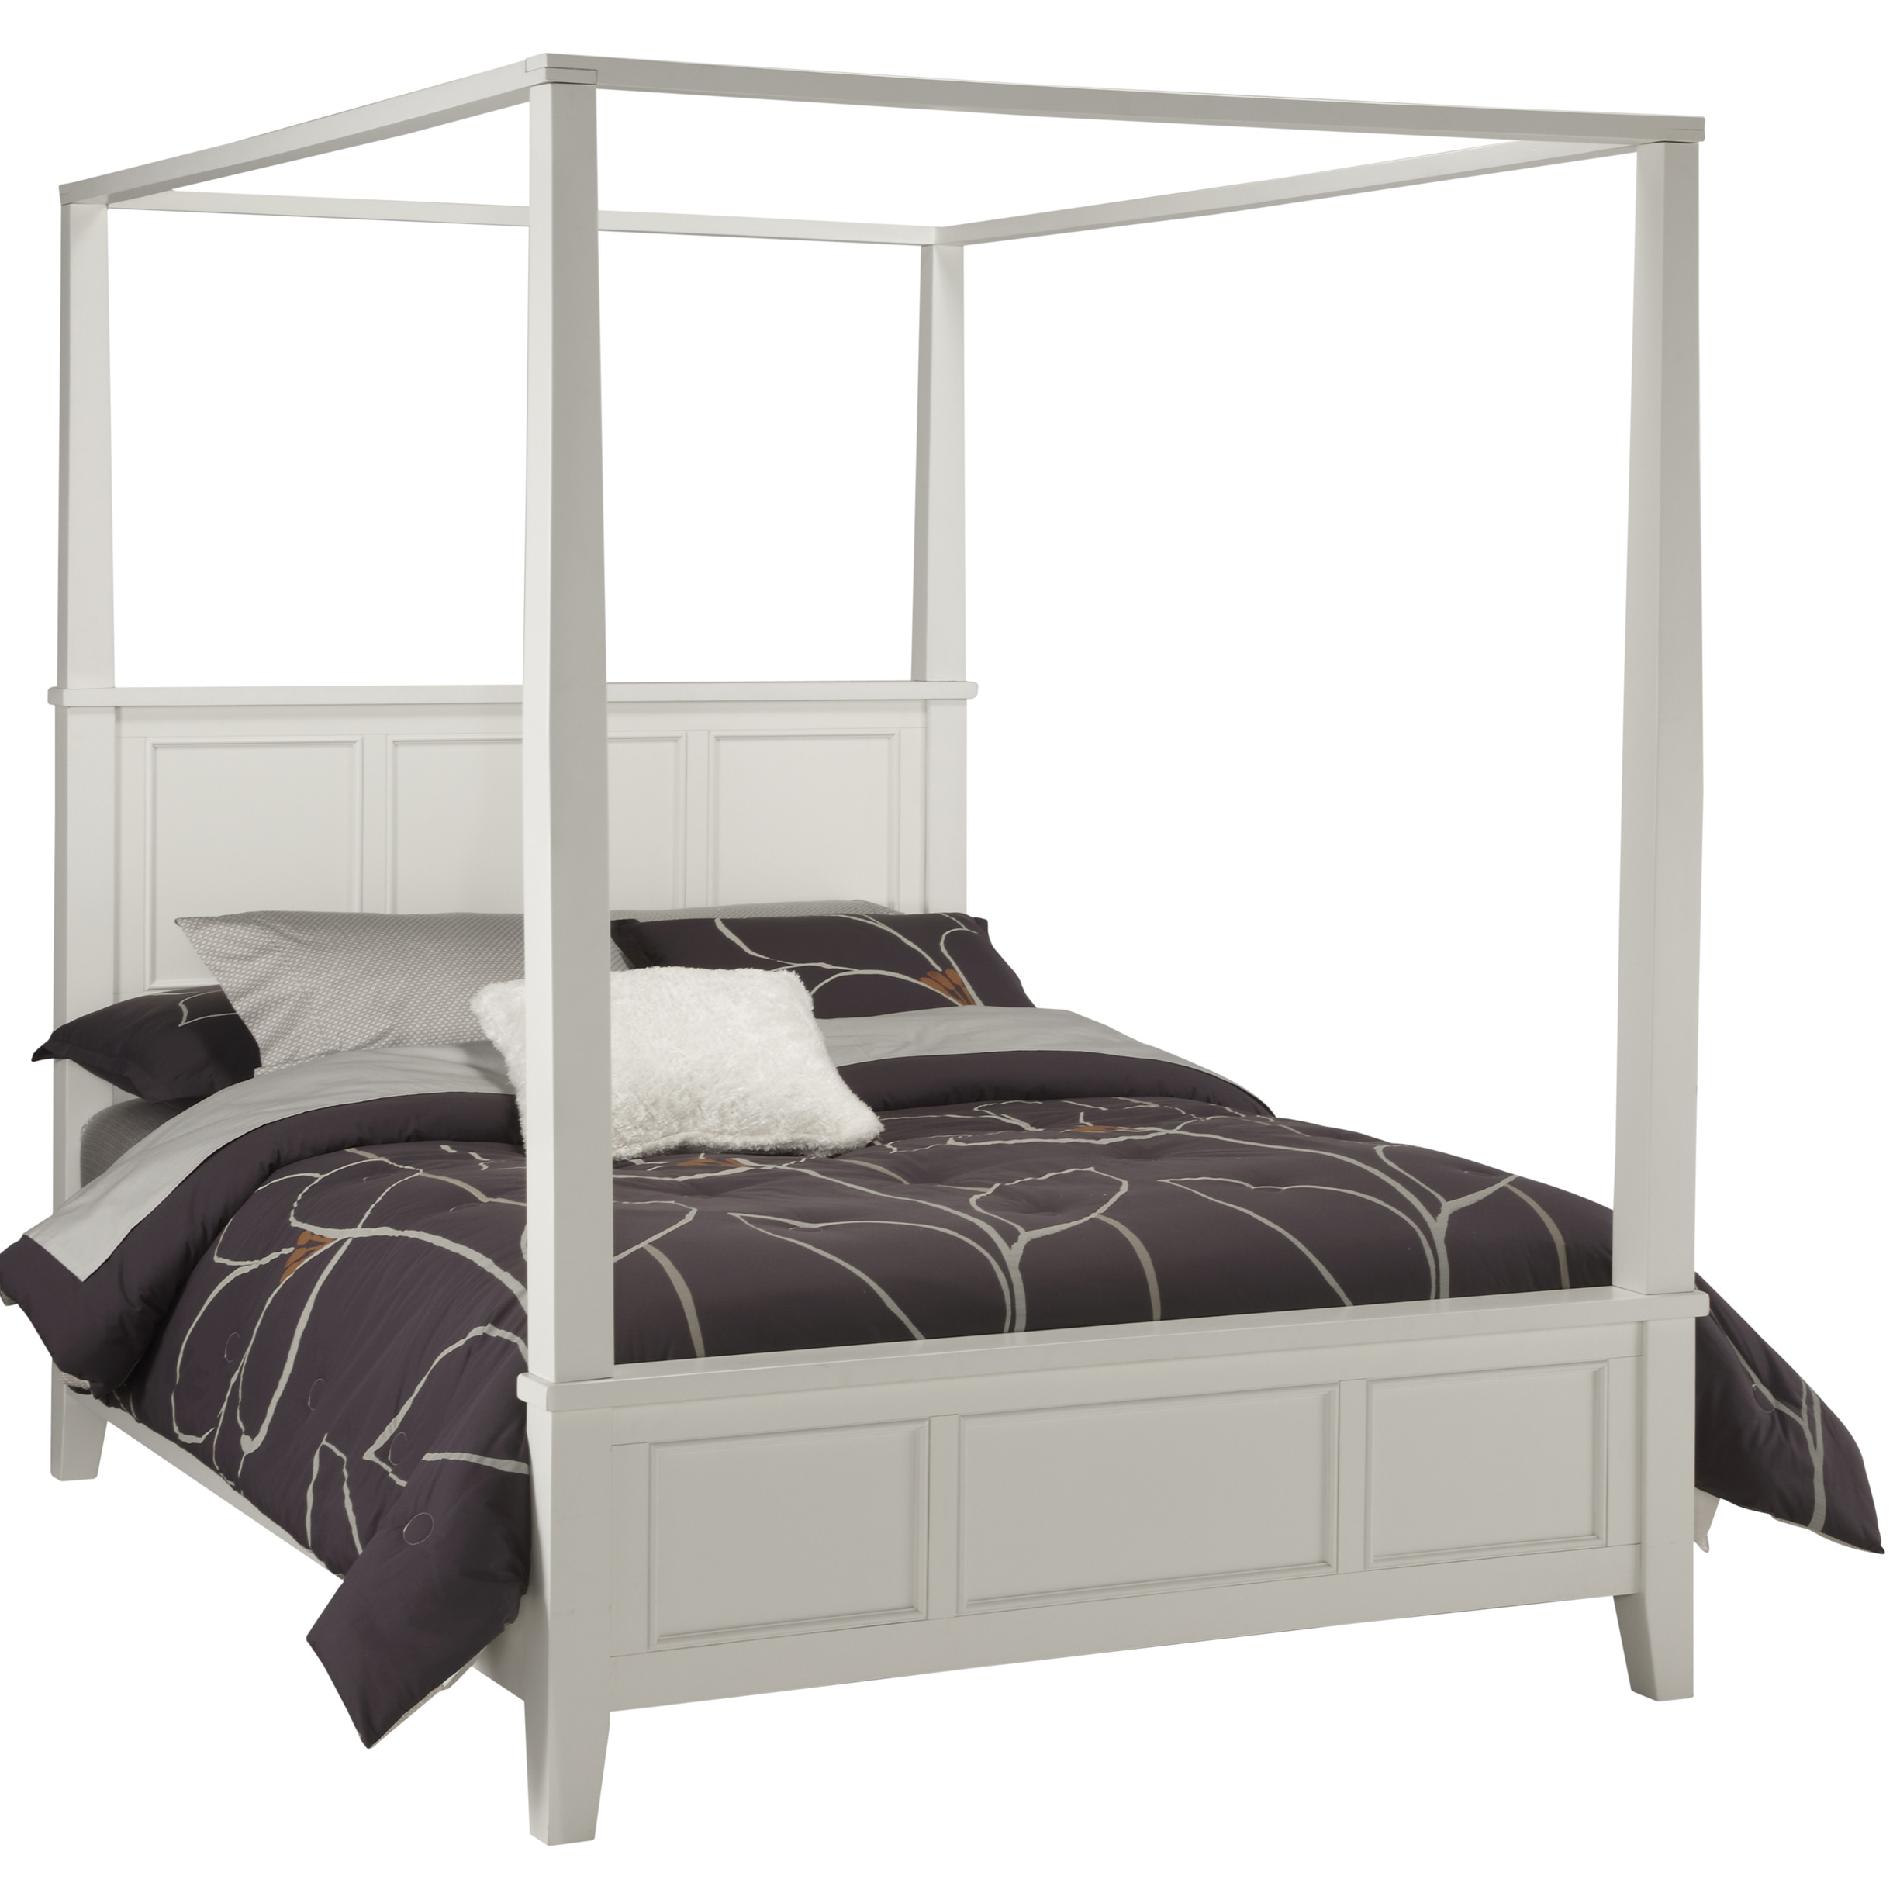 Home Styles Bedford Black King Canopy Bed - Home - Furniture - Bedroom ...